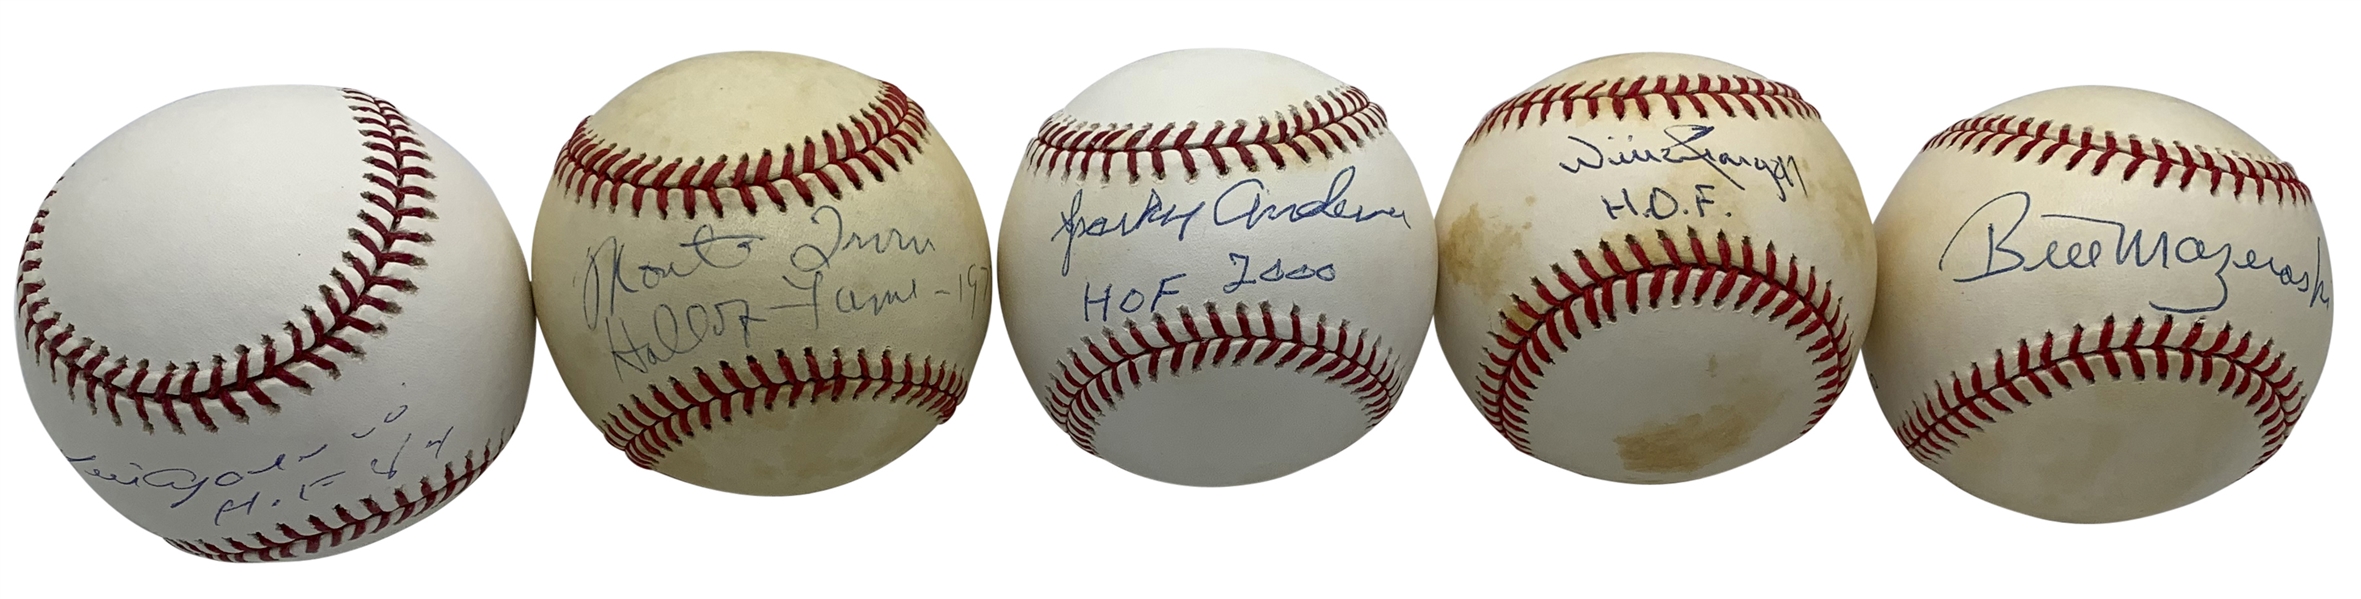 MLB Greats Lot of Five (5) Signed Baseballs w/ Anderson, Stargell & Others! (Beckett/BAS Guaranteed)